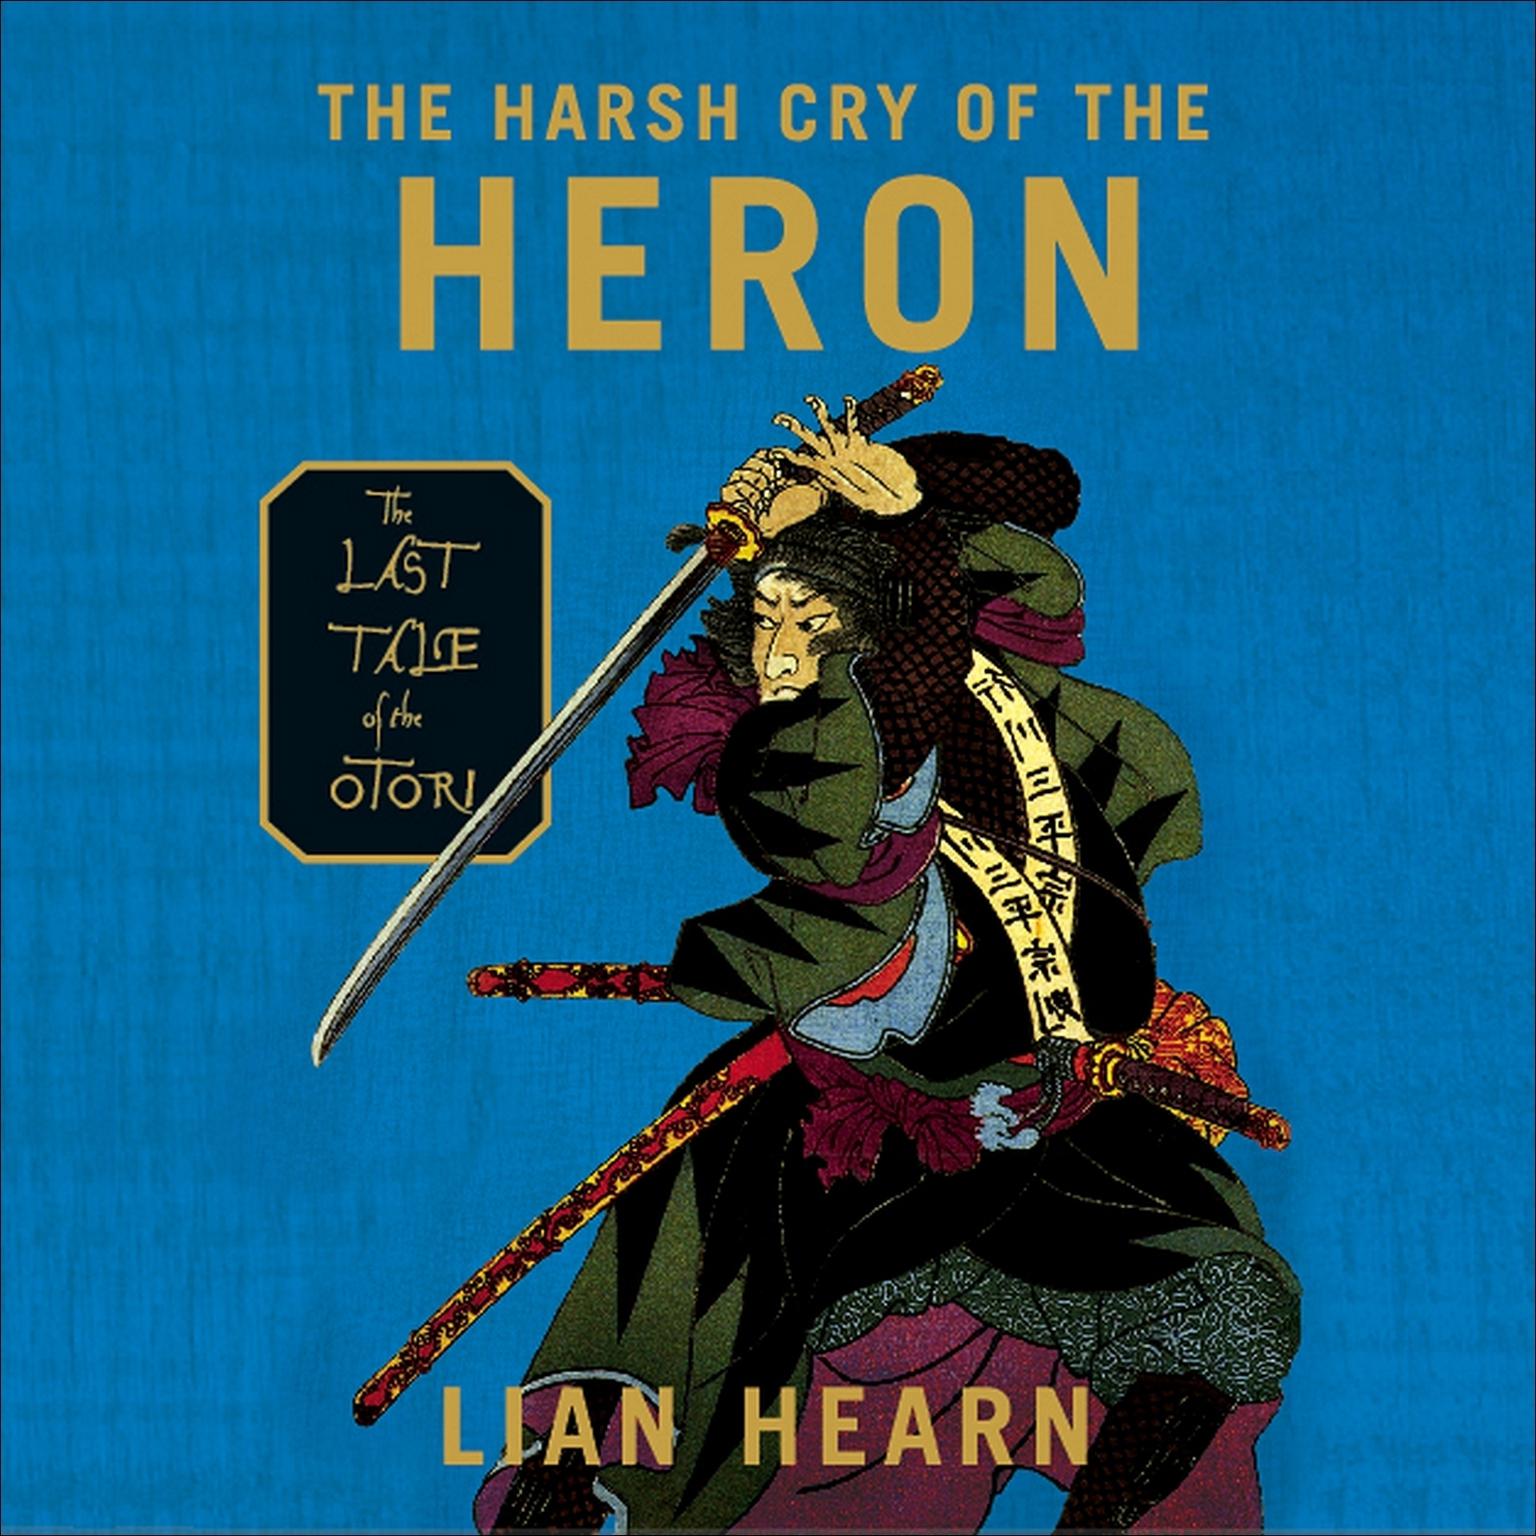 The Harsh Cry of the Heron: The Last Tale of the Otori Audiobook, by Lian Hearn